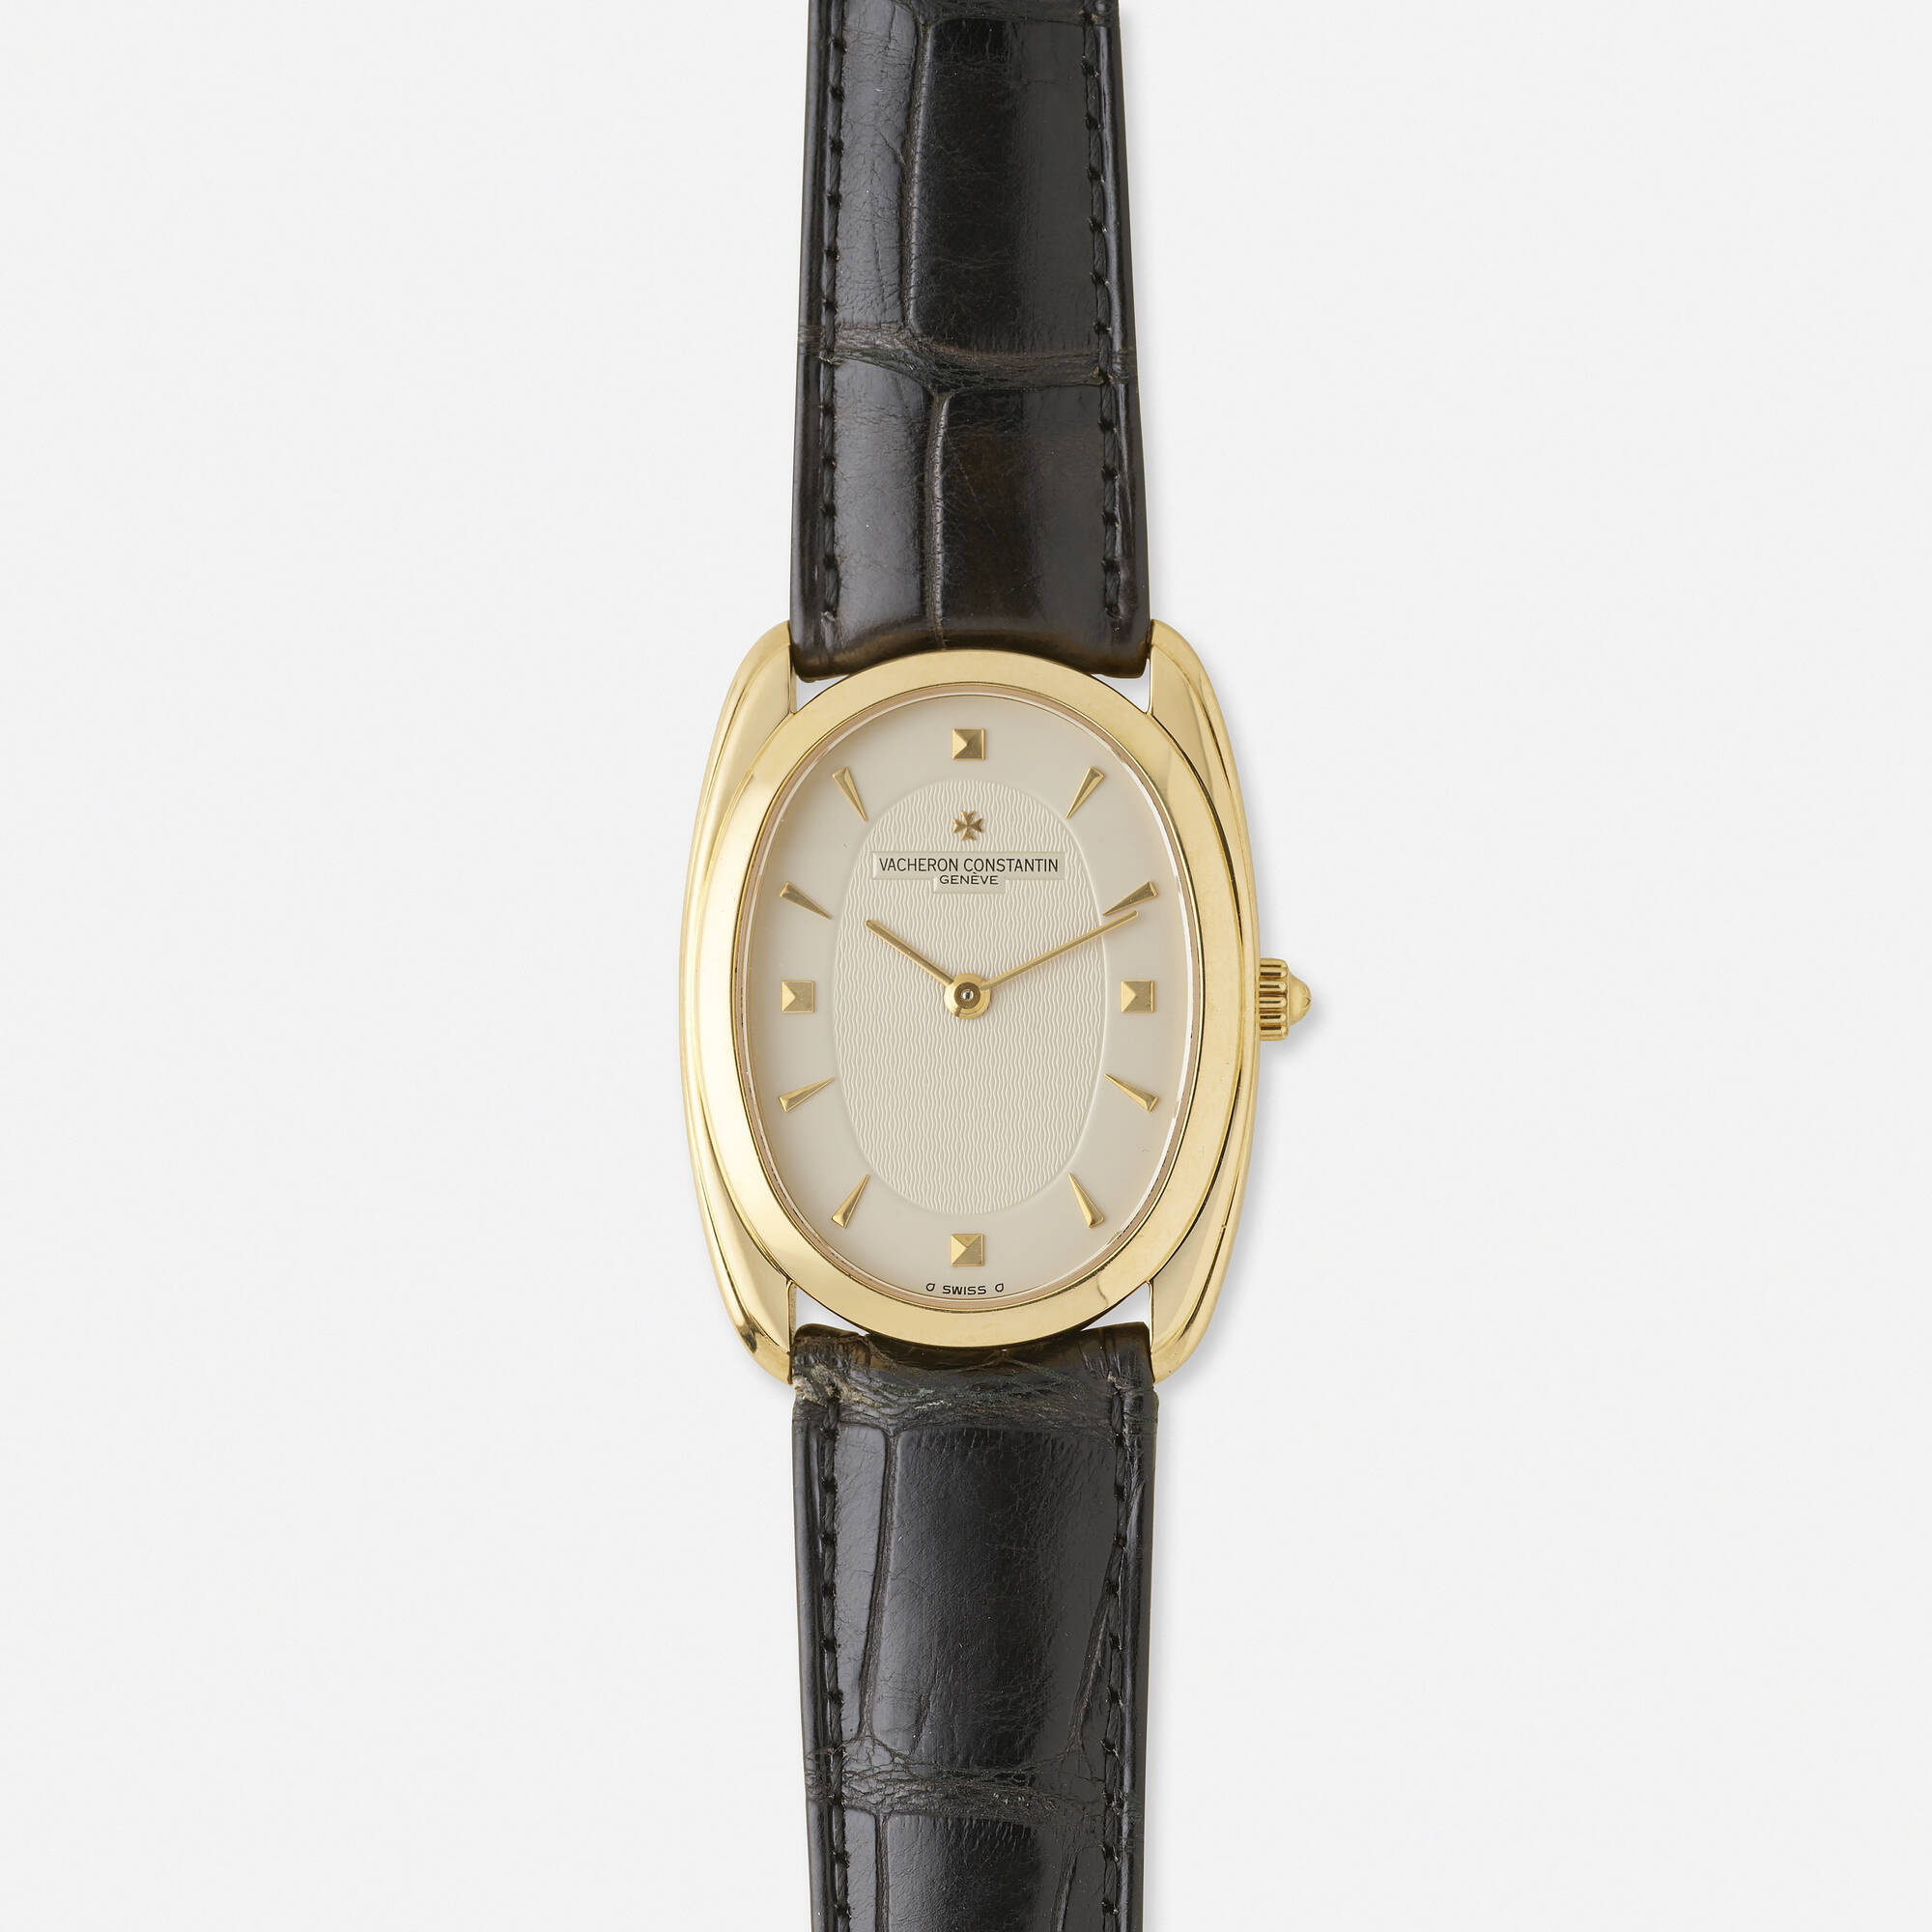 459: VACHERON CONSTANTIN, \'Les Historiques\' gold and leather wristwatch,  Ref. 31110/000J < Watches: A Prominent Store Collection, 30 September 2021  < Auctions | Rago Auctions